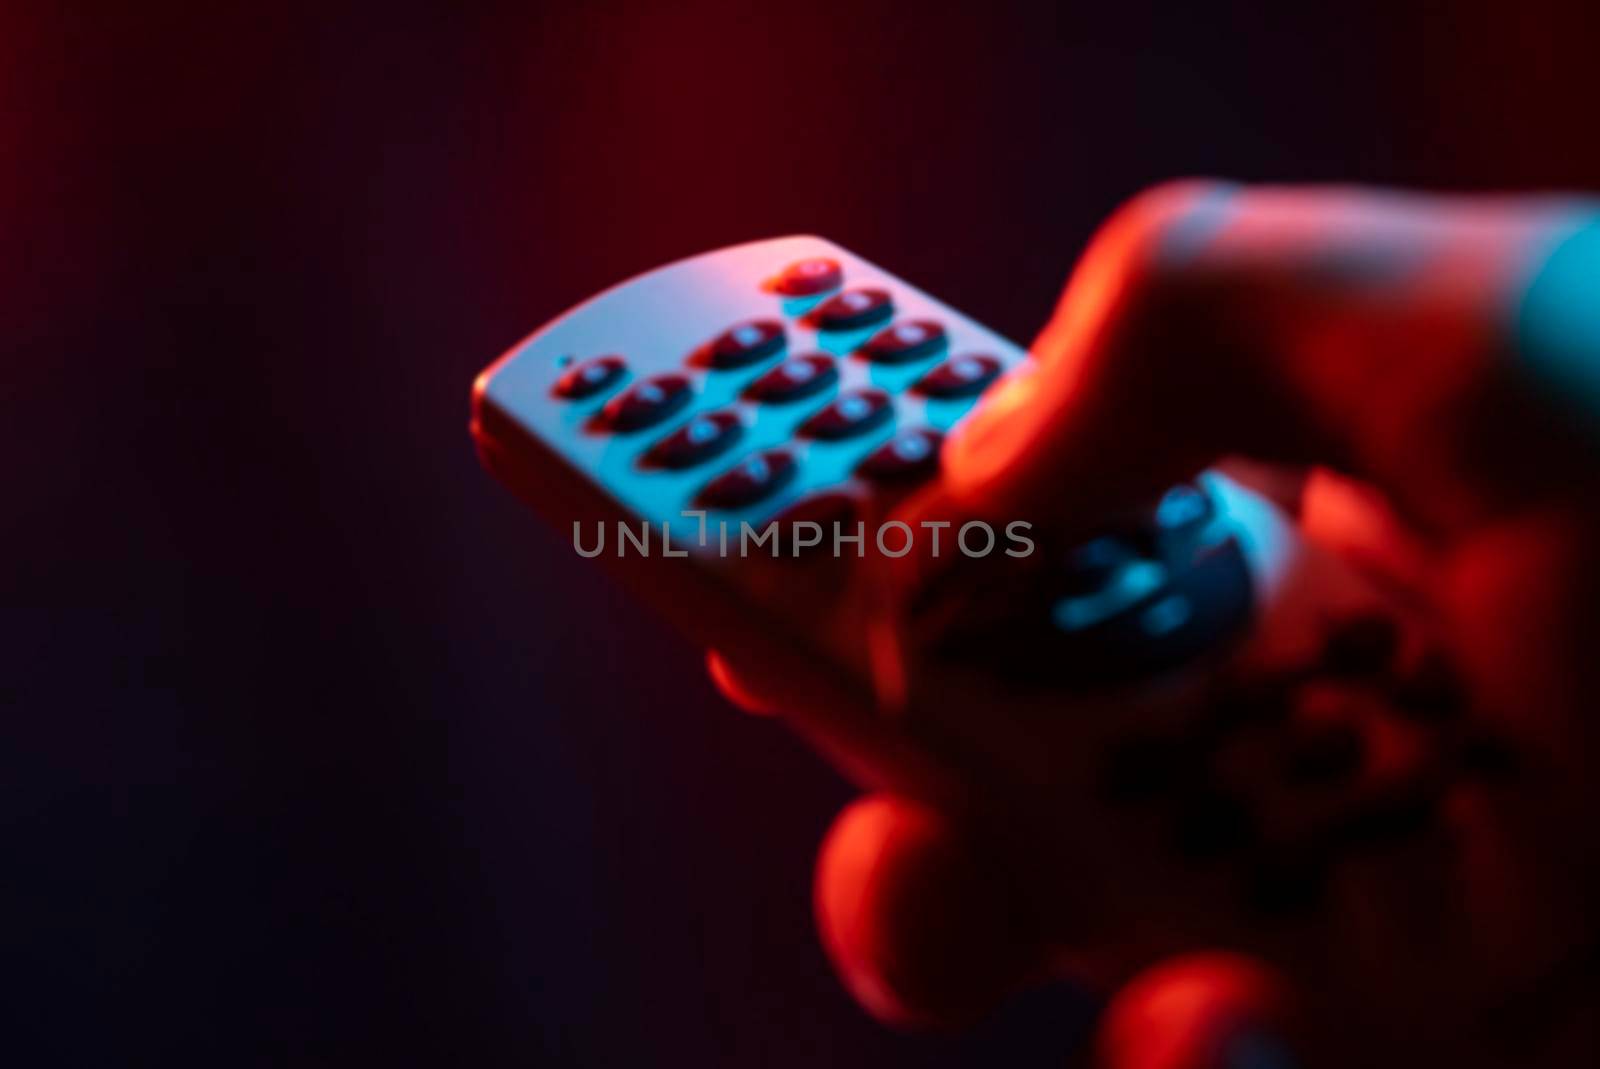 Hold remote control in hand 2 by pippocarlot